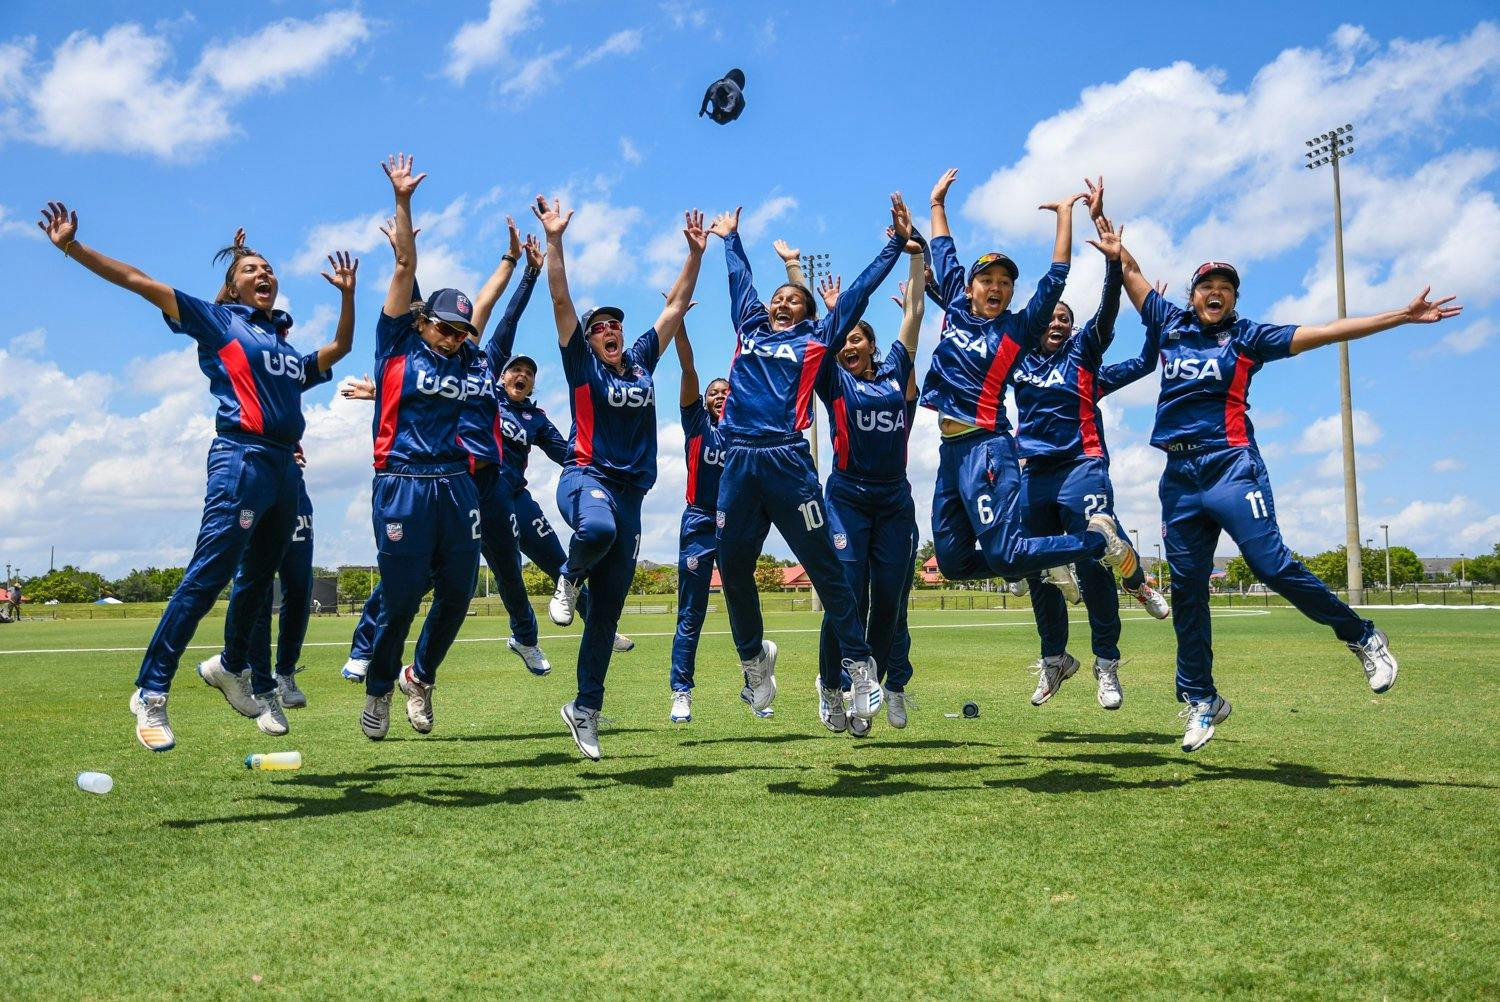 The U.S. women's cricket team celebrates after a 3-0 victory against Canada in a T20 series in May that helped seal a spot in the ICC T20 Global Qualifiers, to be held in Scotland next month. (USA Cricket)